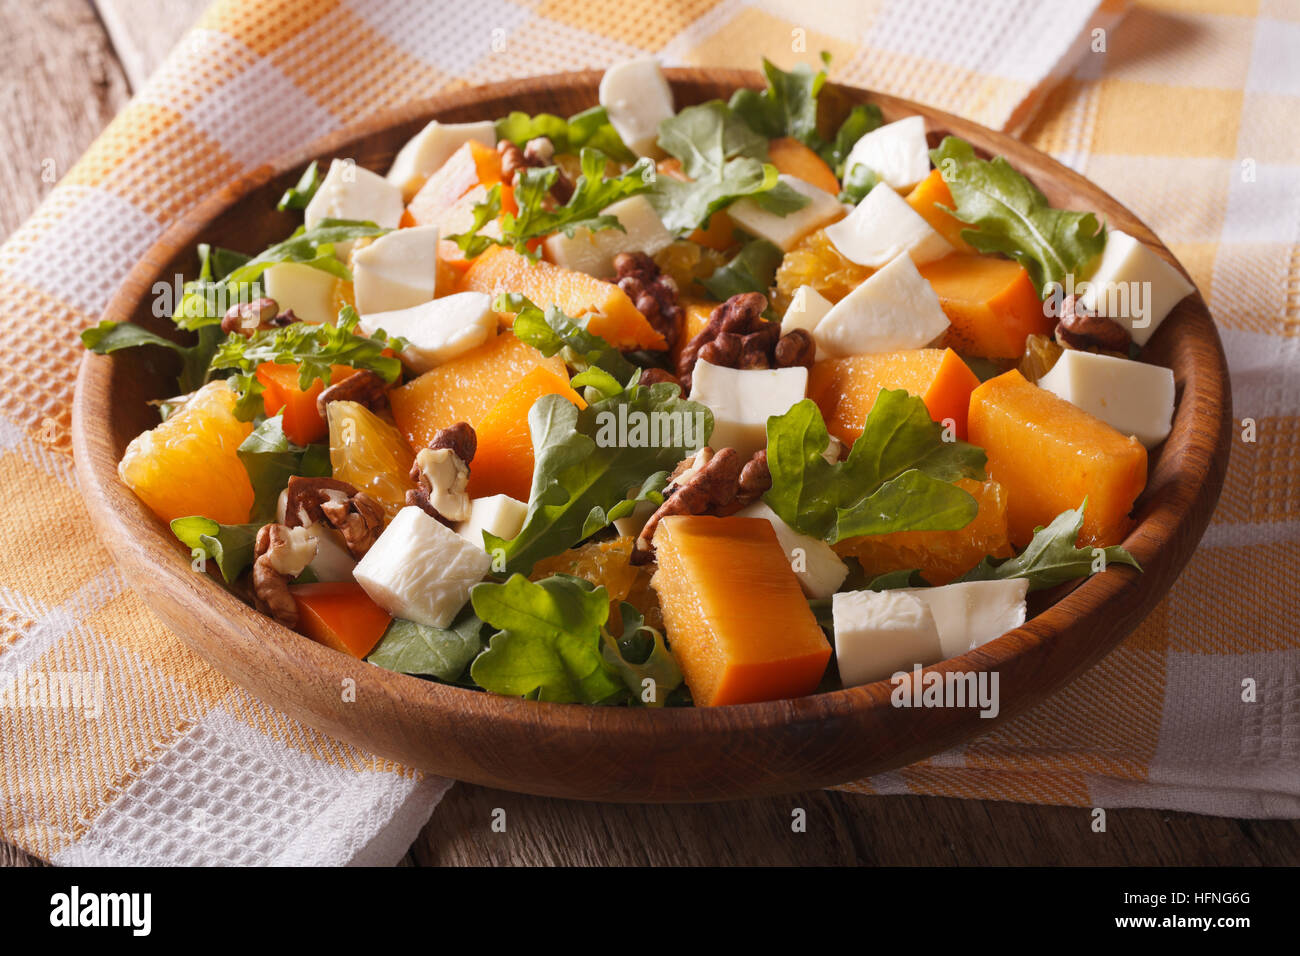 salad with persimmon, arugula, oranges and cheese close-up on the table. Horizontal, rustic Stock Photo